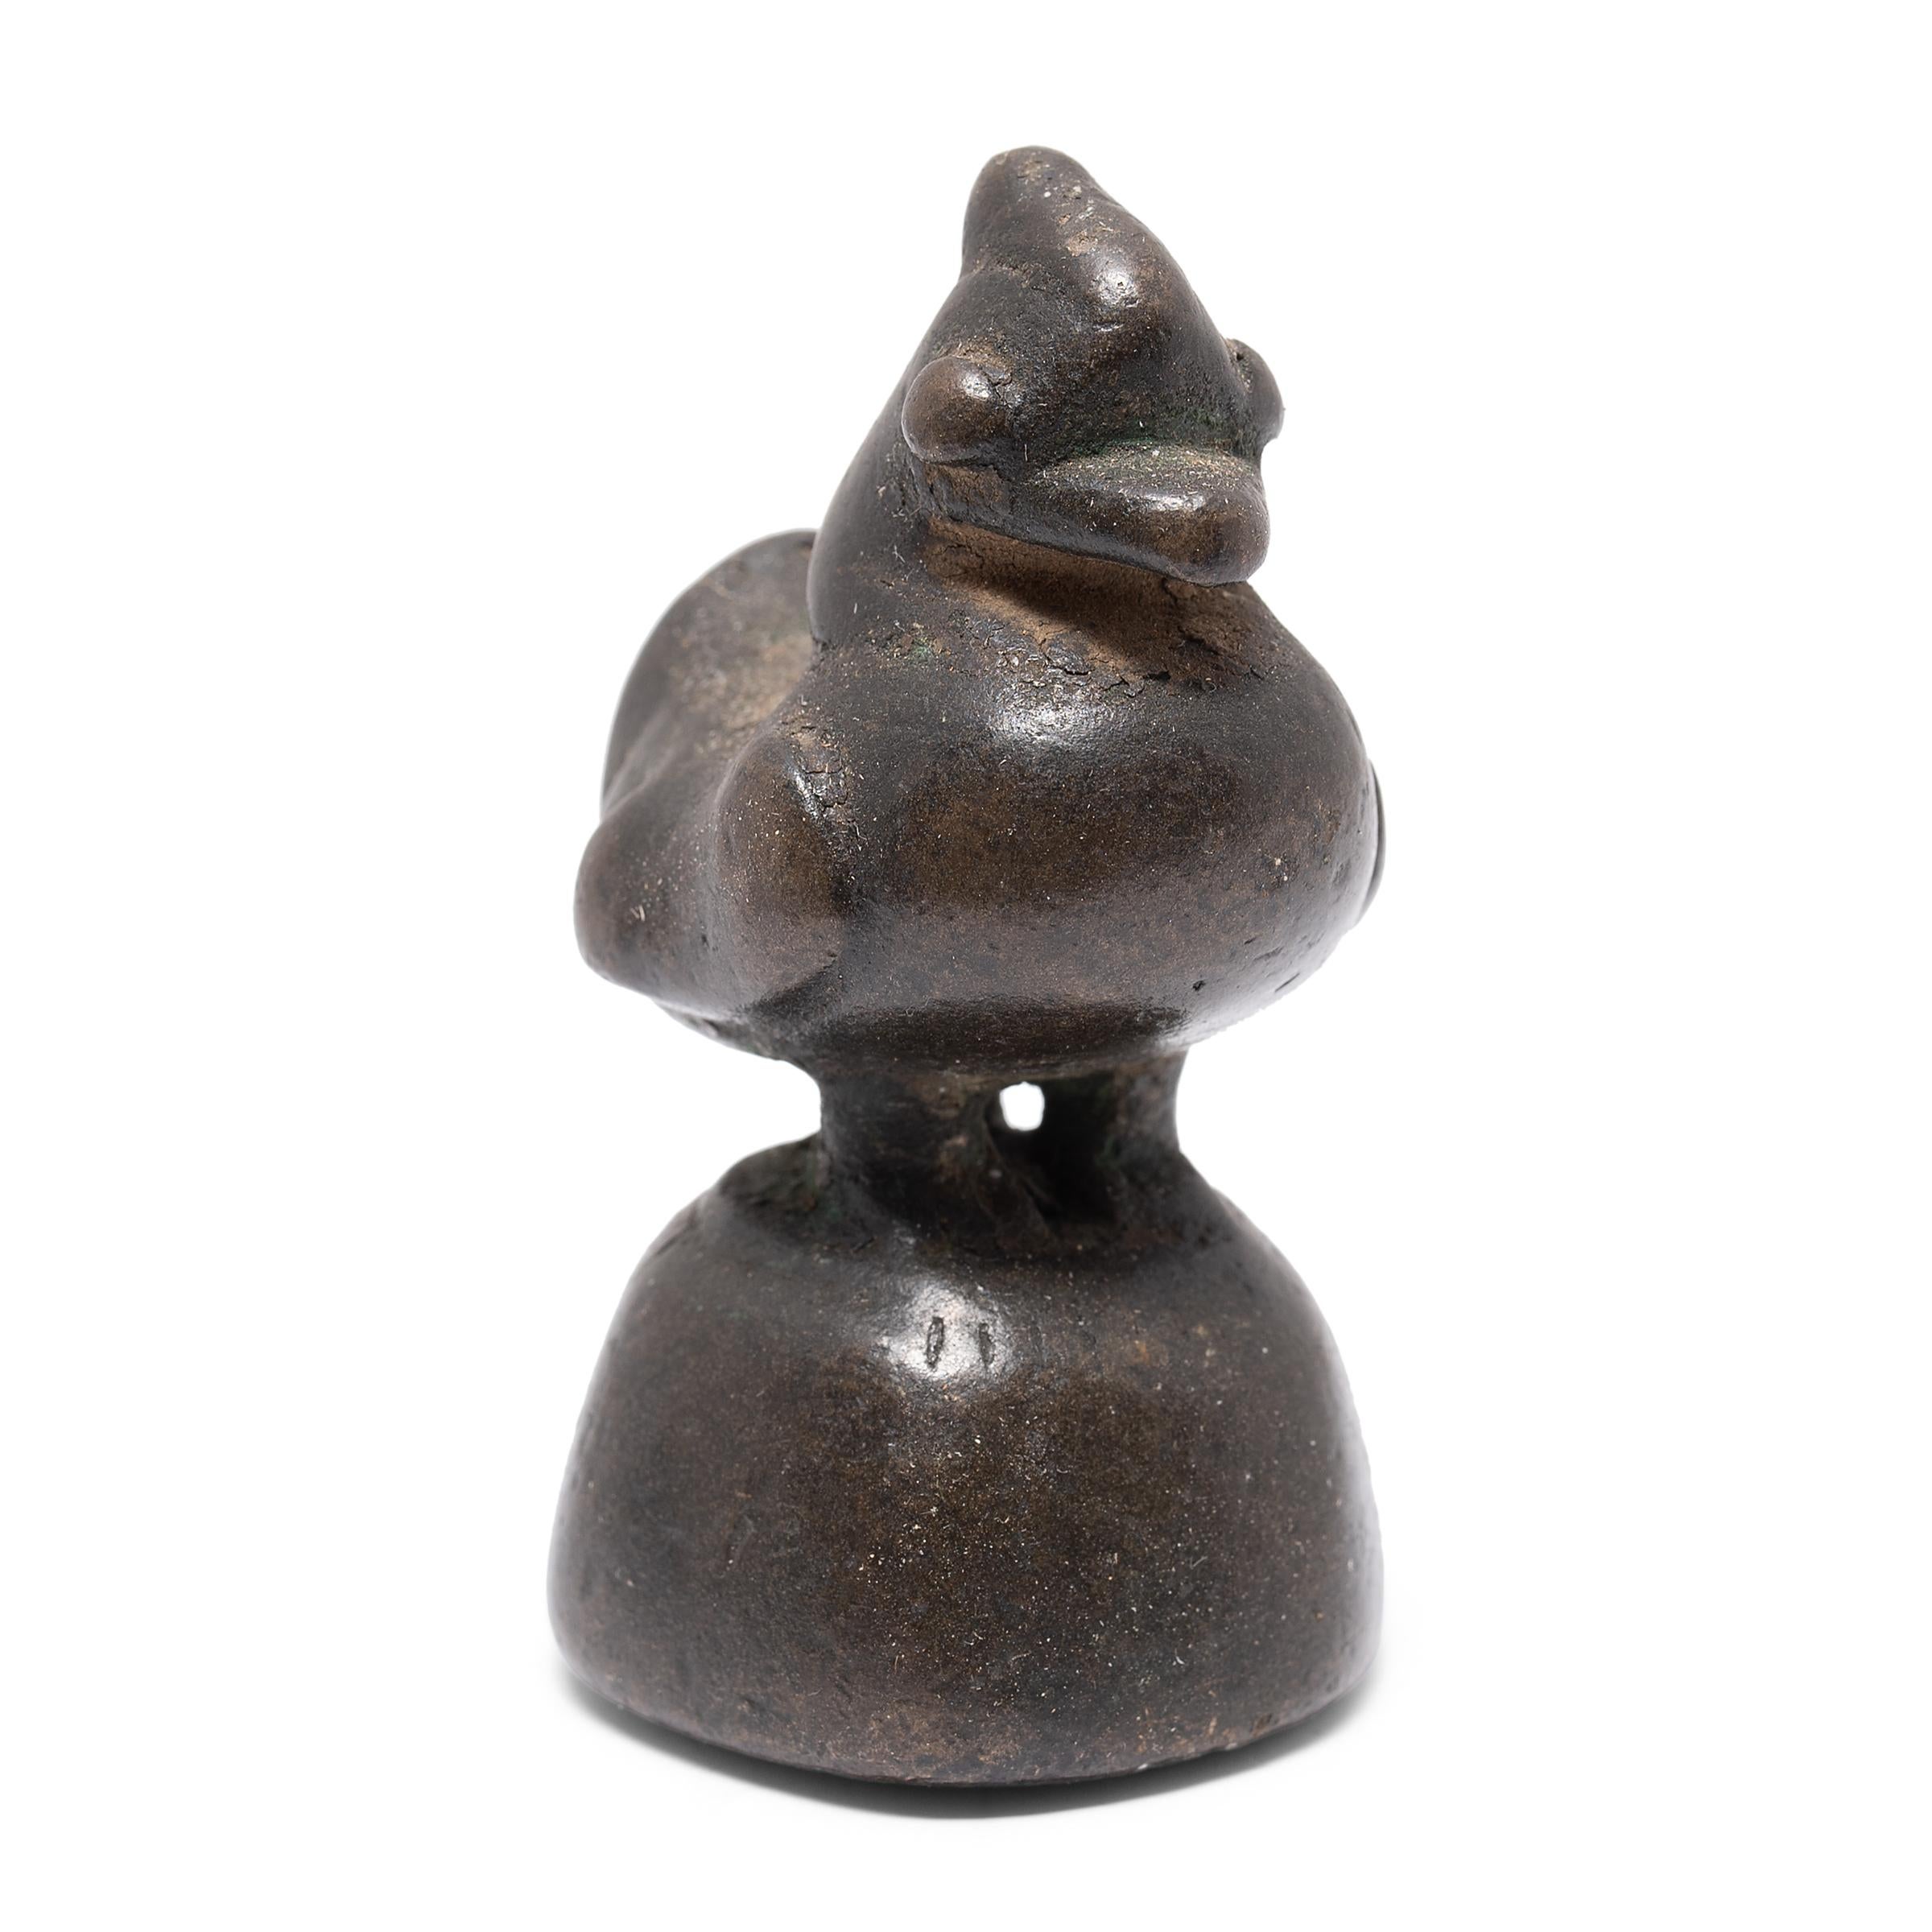 This small figurine was originally used as a counterweight for a tabletop balance, used to parcel out opium, spices, or other valuable goods. The petite weight is cast in bronze in the form of a rooster, the tenth symbolic animal of the Chinese